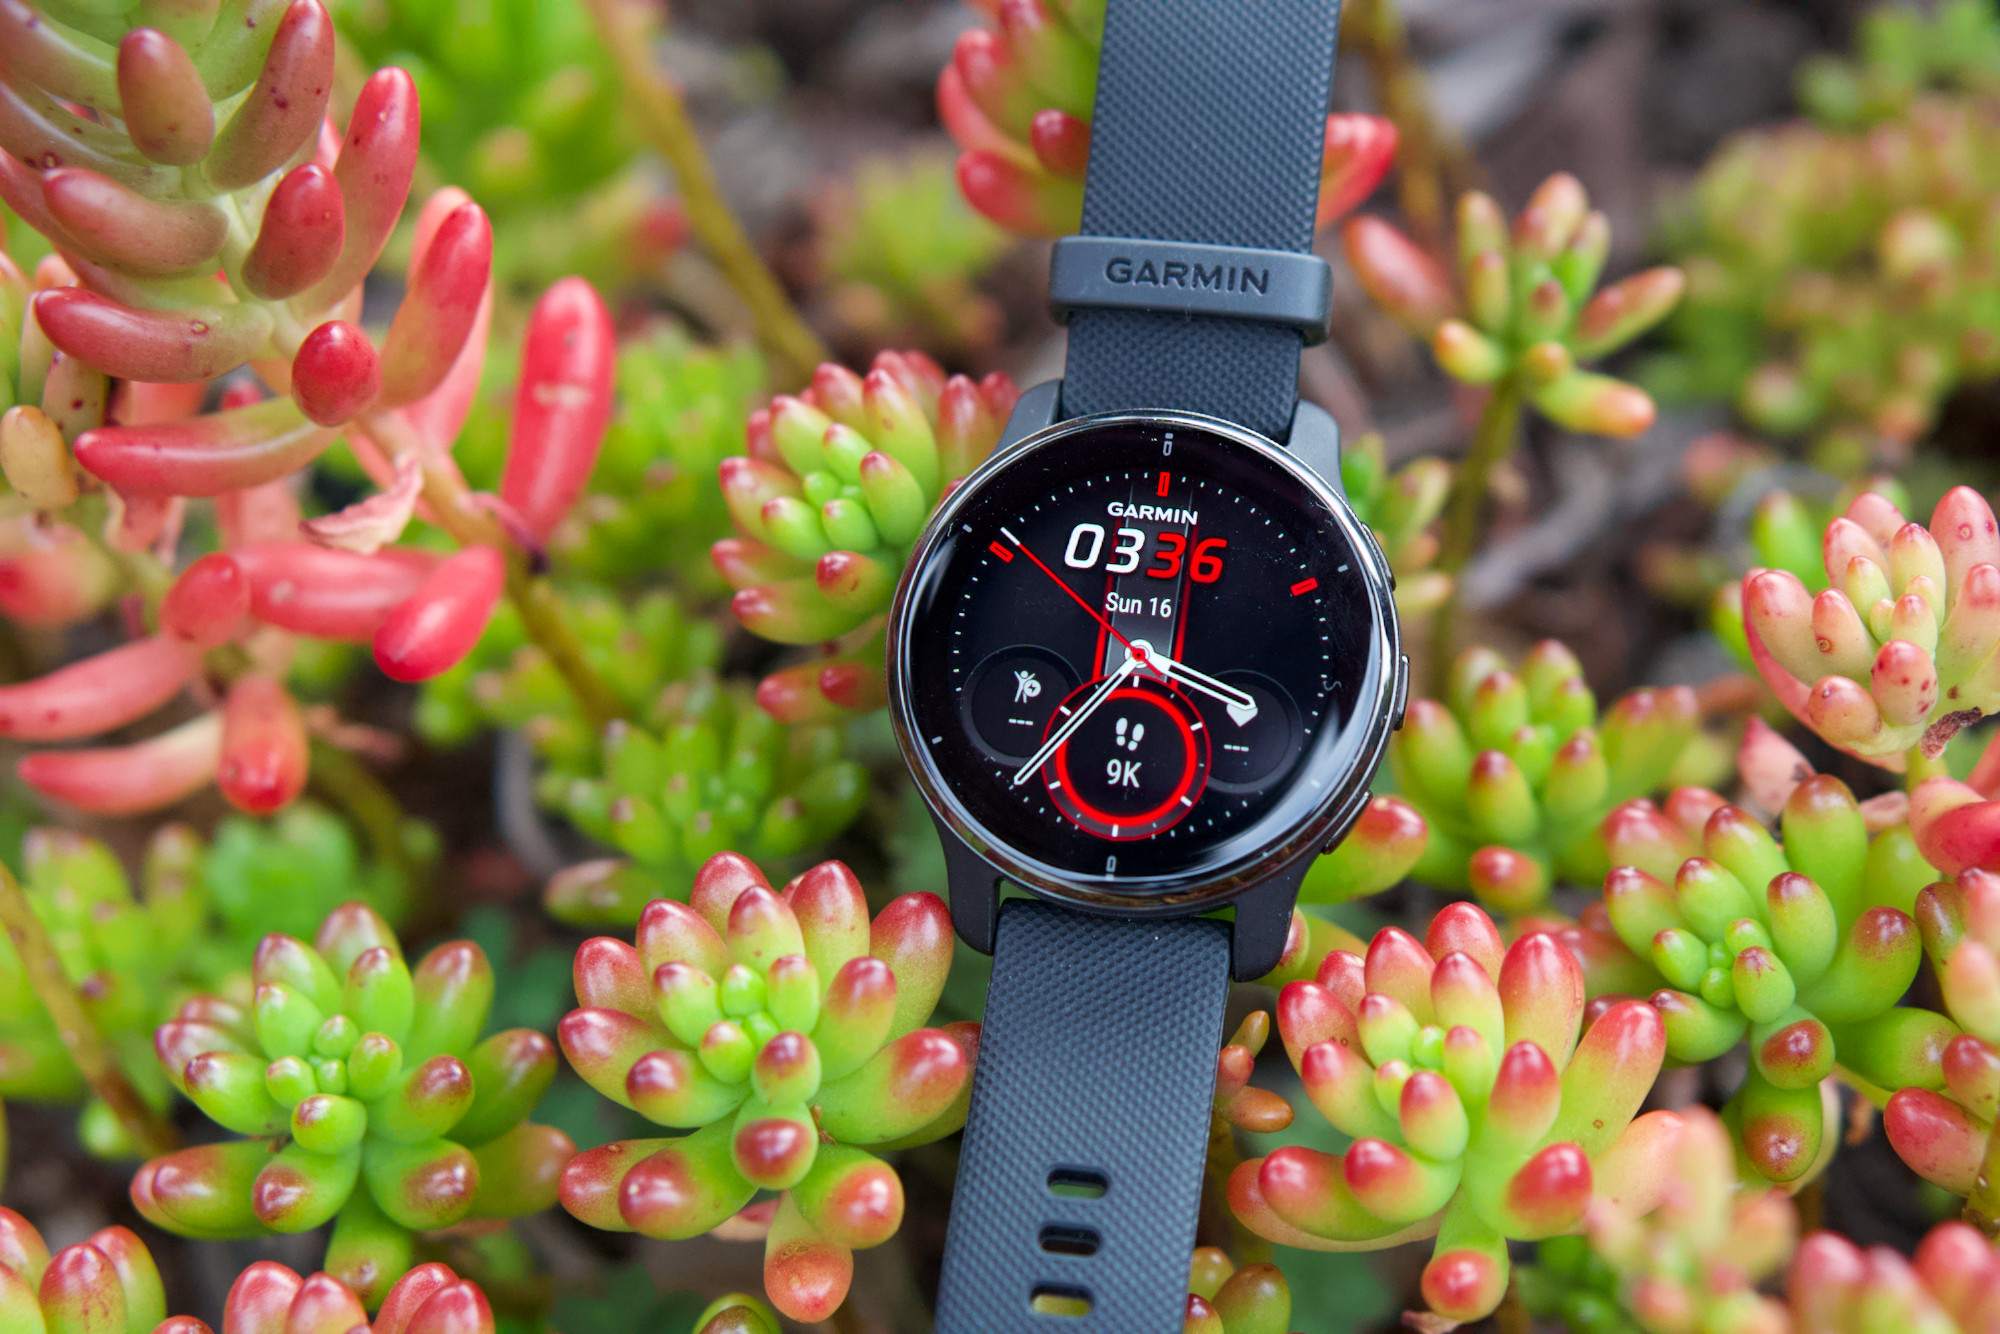 klasse kran Slik Garmin's smartwatches are on a once-in-a-timeline sale for Prime Day | iMore